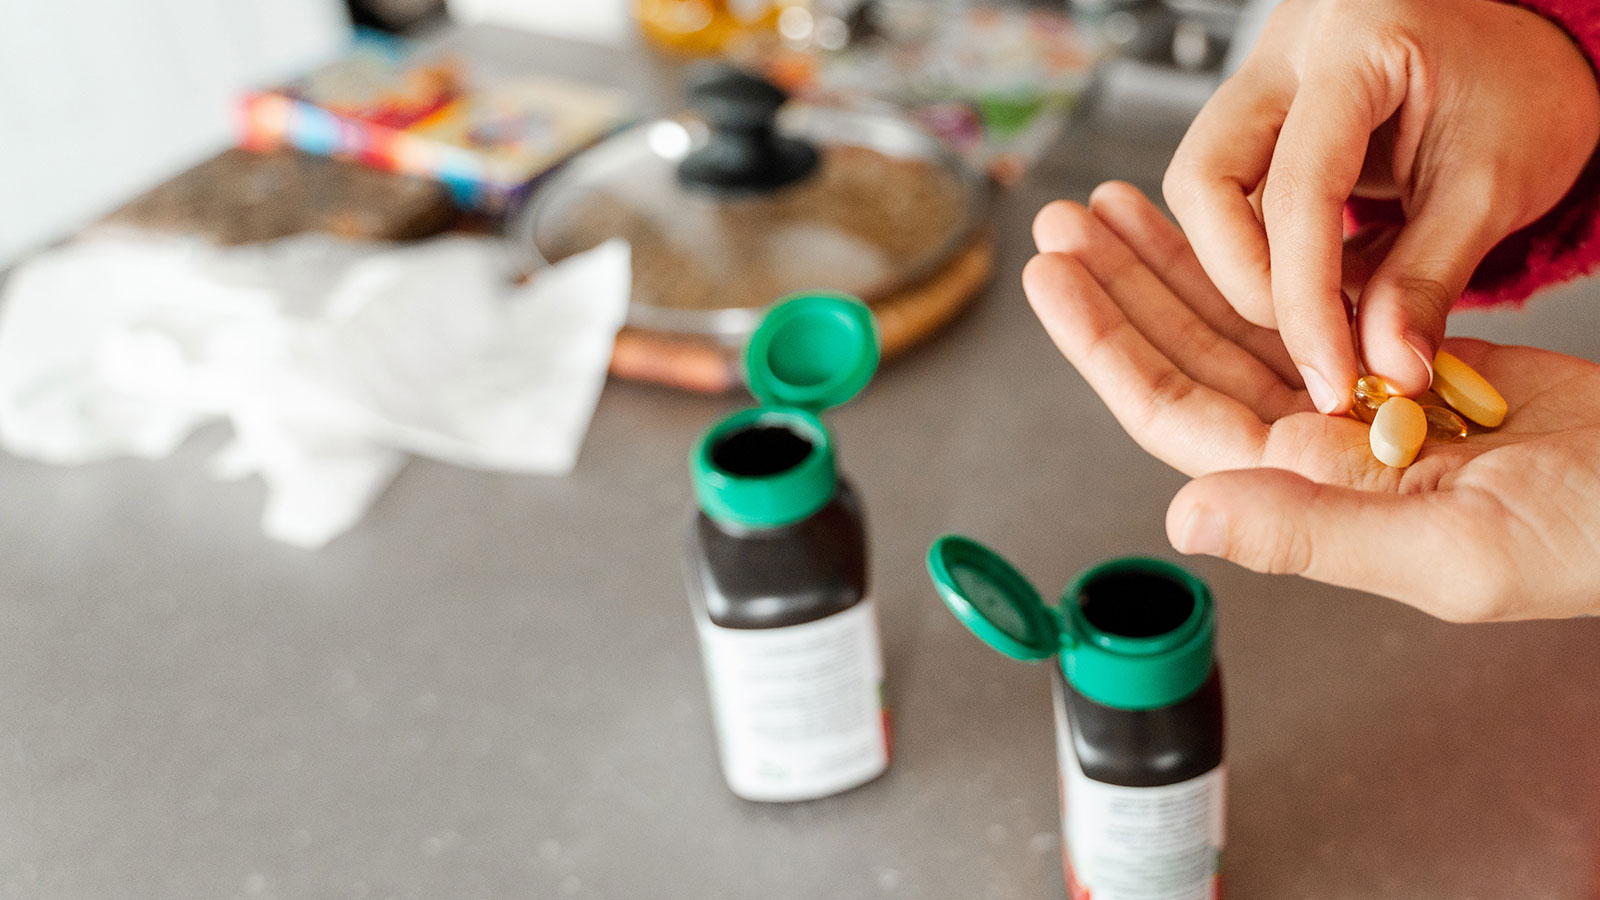 supplements being carefully chosen out of persons hand